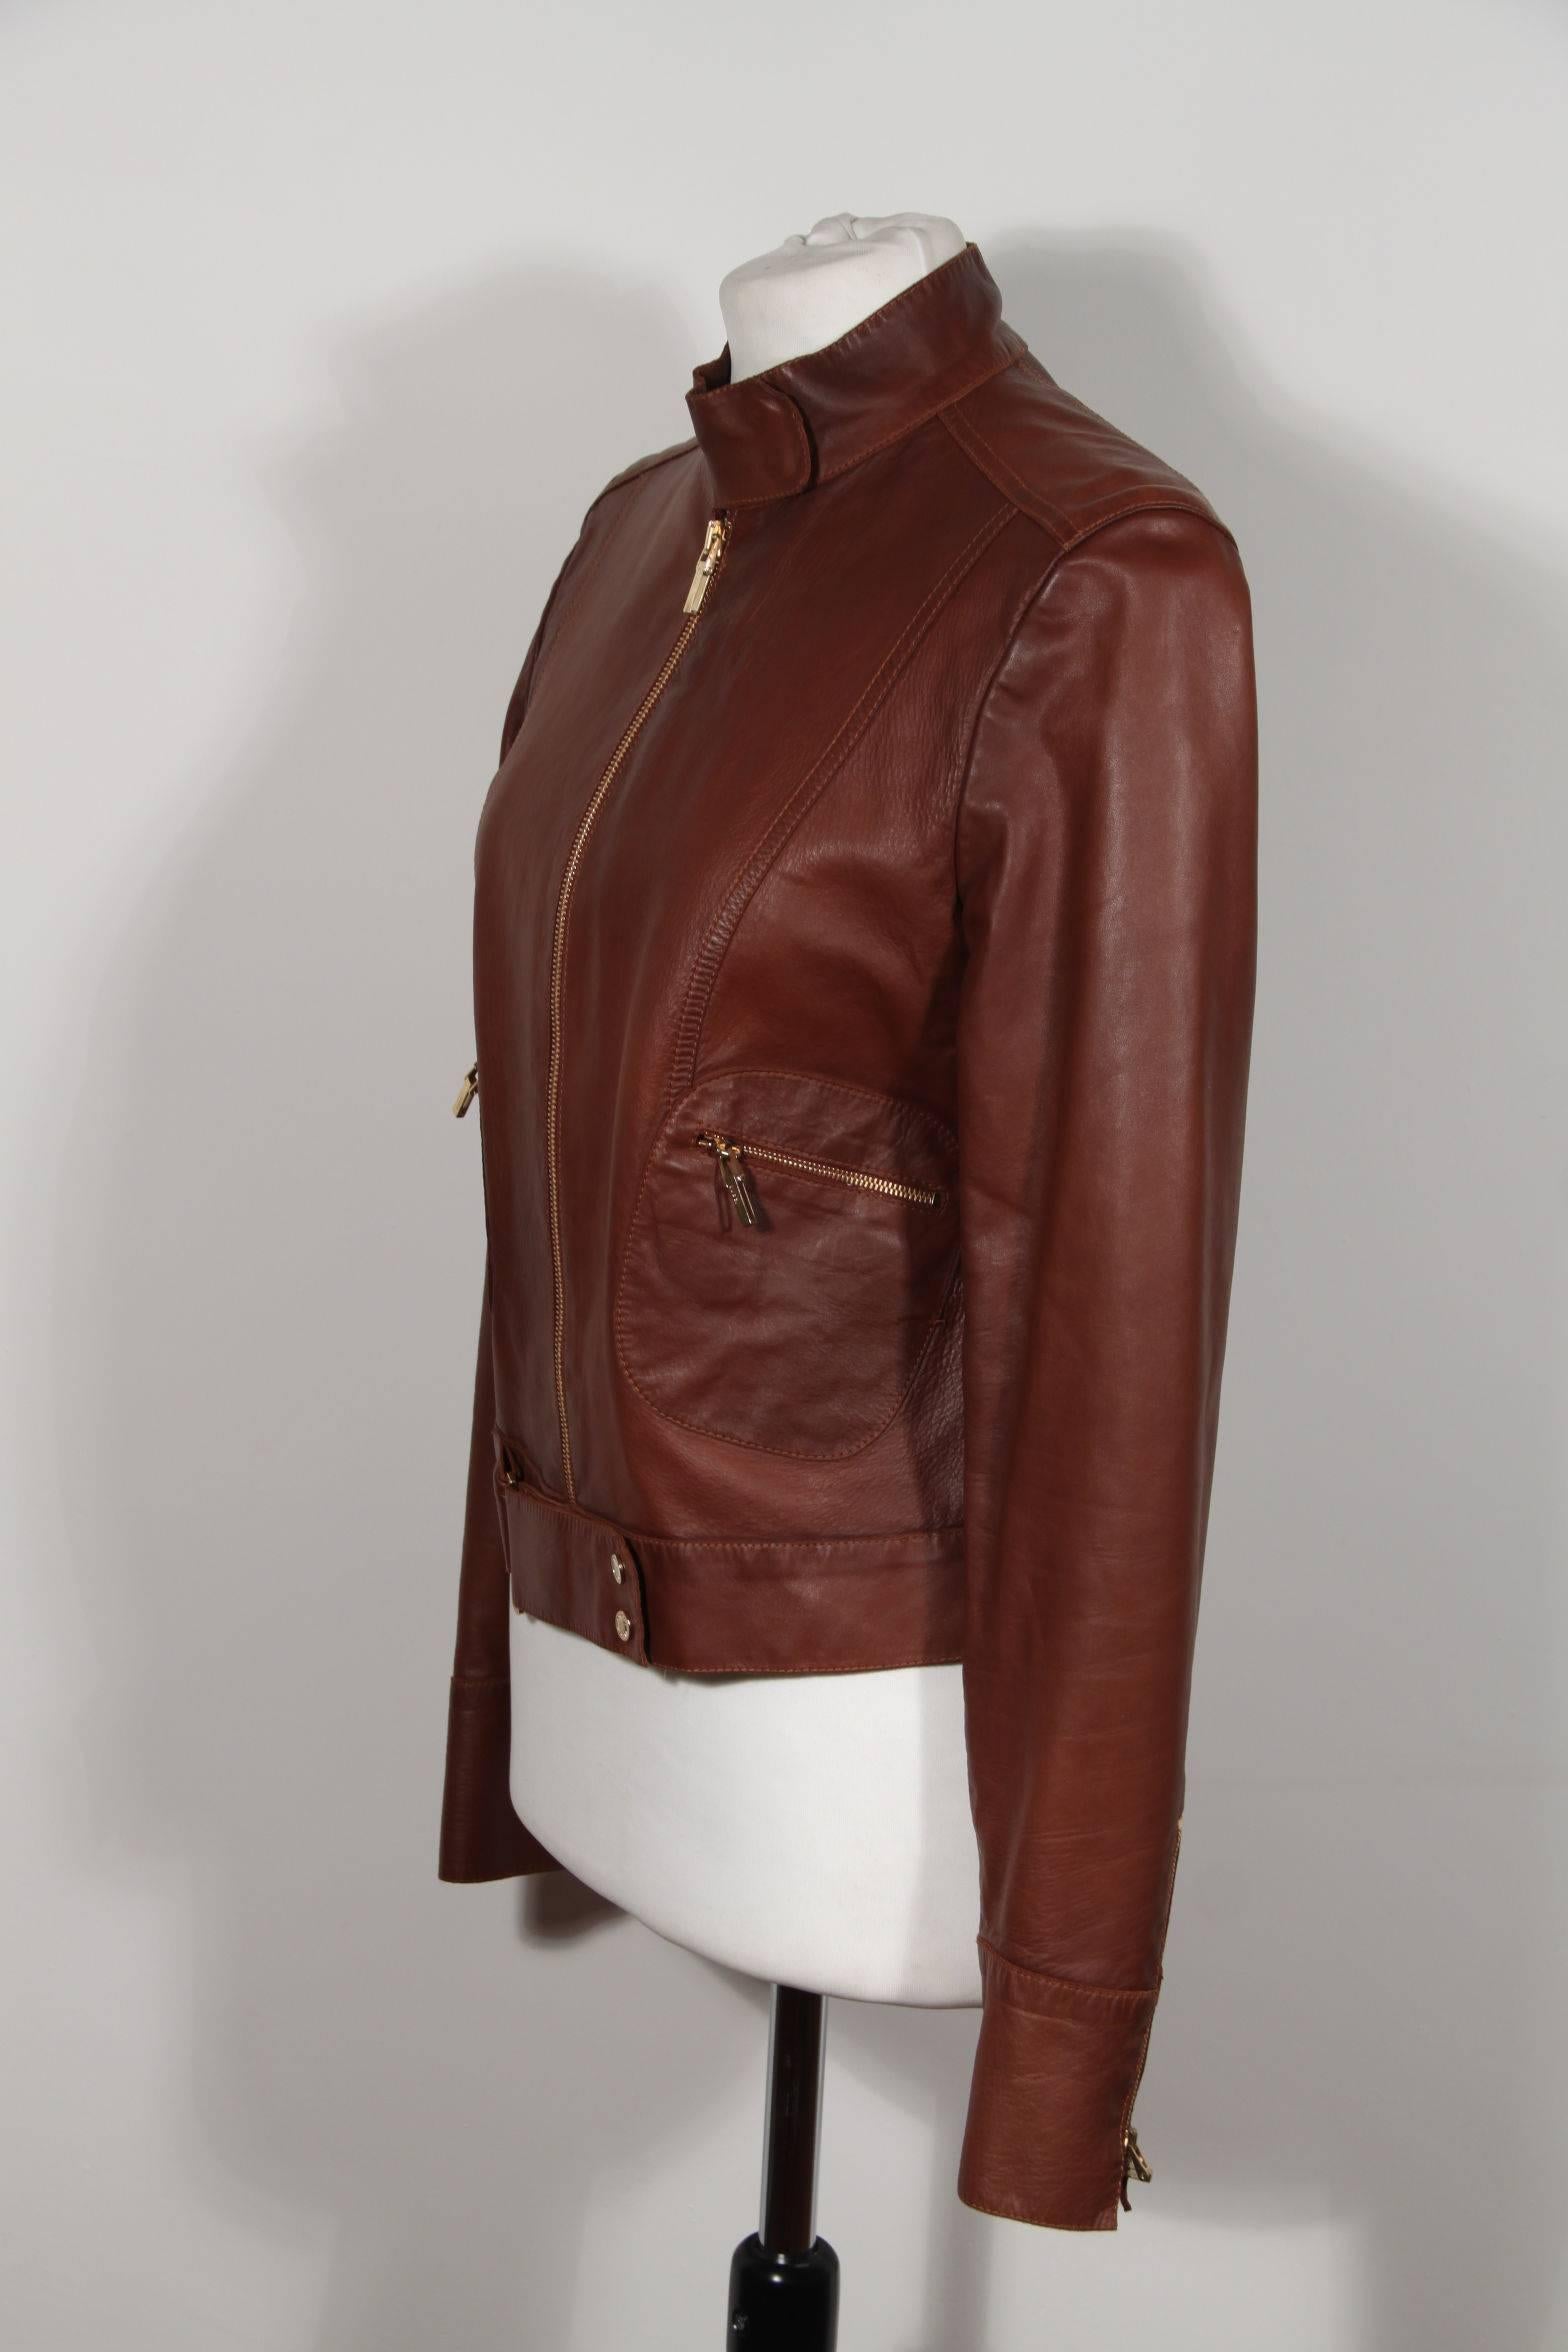 GUCCI TOM FORD Brown LEATHER Biker JACKET Zip Front Sz 40 1